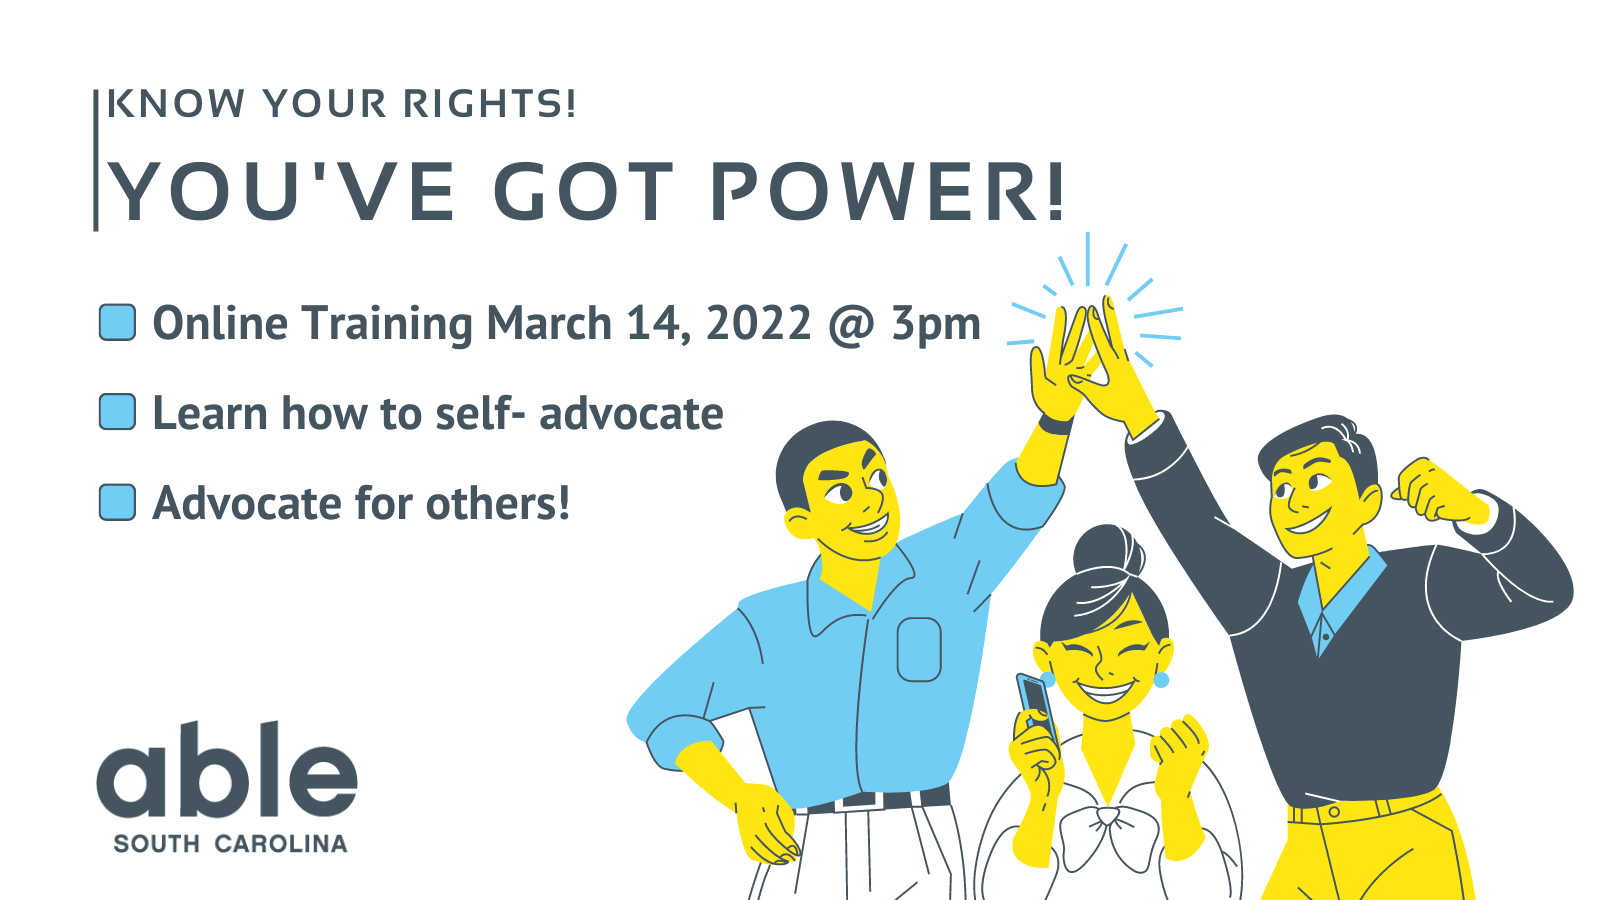 Graphic with white background and gray text that reads, ‘Know your rights! You’ve got power! Online training march 14, 2022 @ 3pm, Learn how to self- advocate, advocate for others!’ Illustration of three people in yellow, gray, and blue to the right. Two of the people are high-fiving, while the other is smiling and holding their fist and phone in a manner that indicates celebration. Able SC logo appears in gray in the bottom left corner.